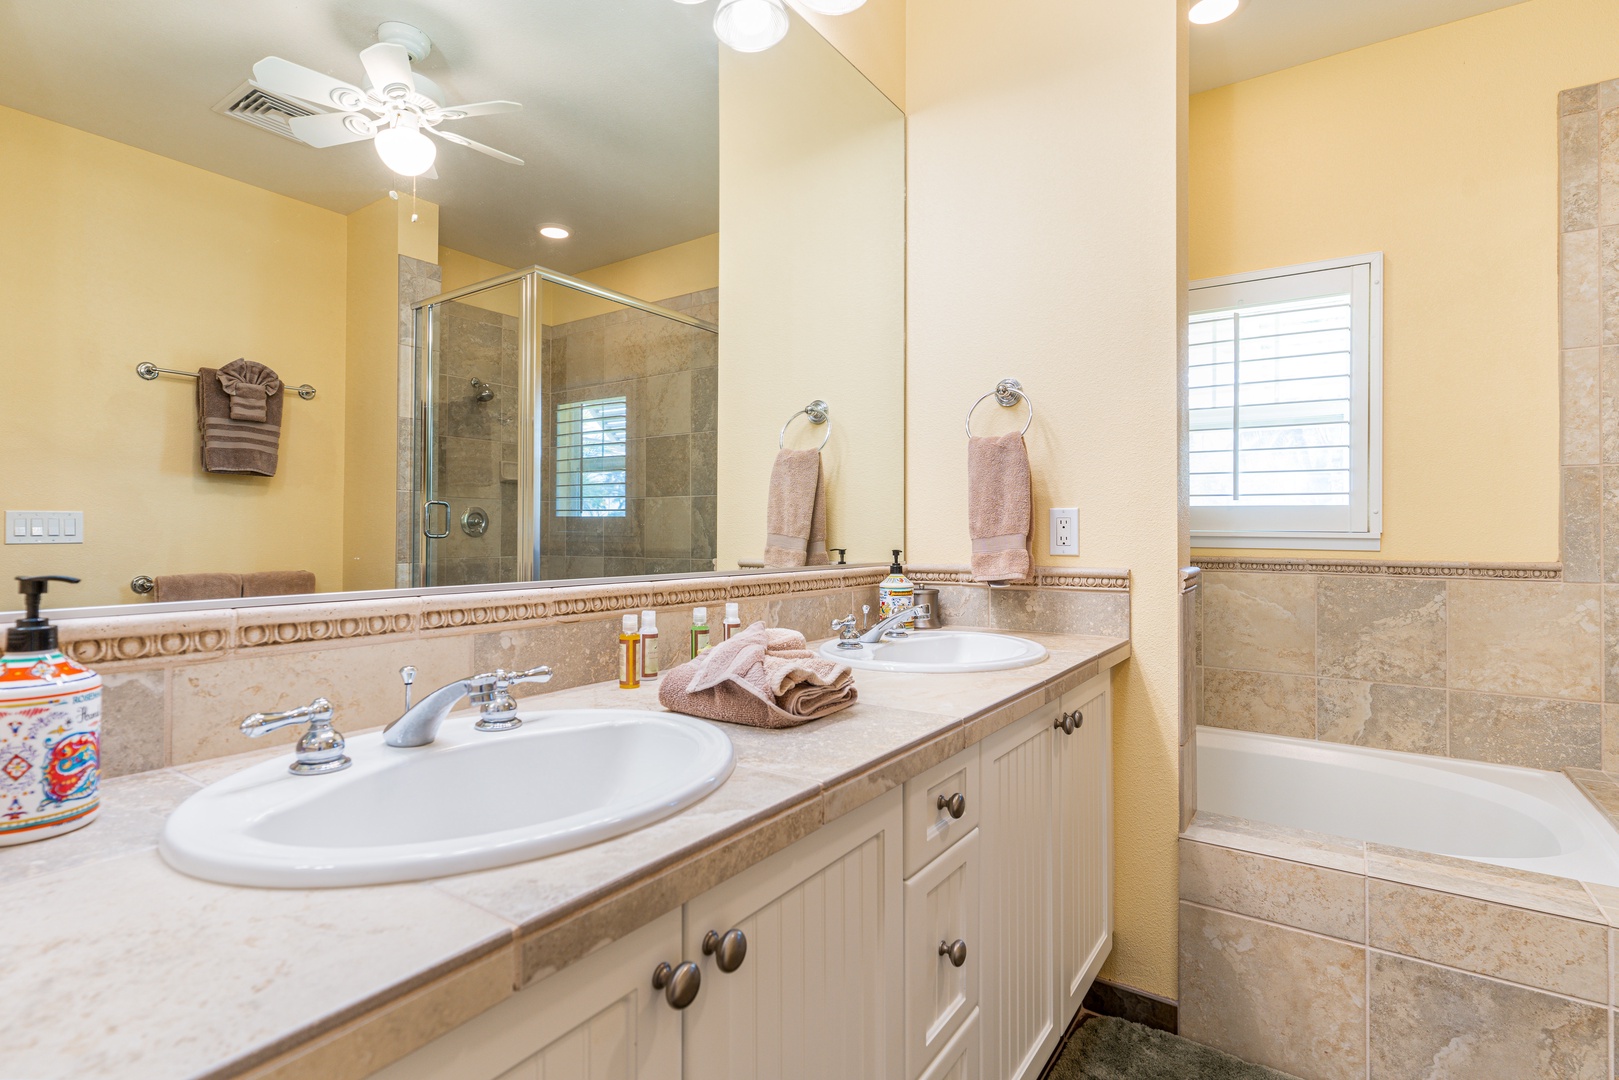 Kapolei Vacation Rentals, Coconut Plantation 1100-2 - The primary guest bathroom with a double vanity, bathtub and shower.